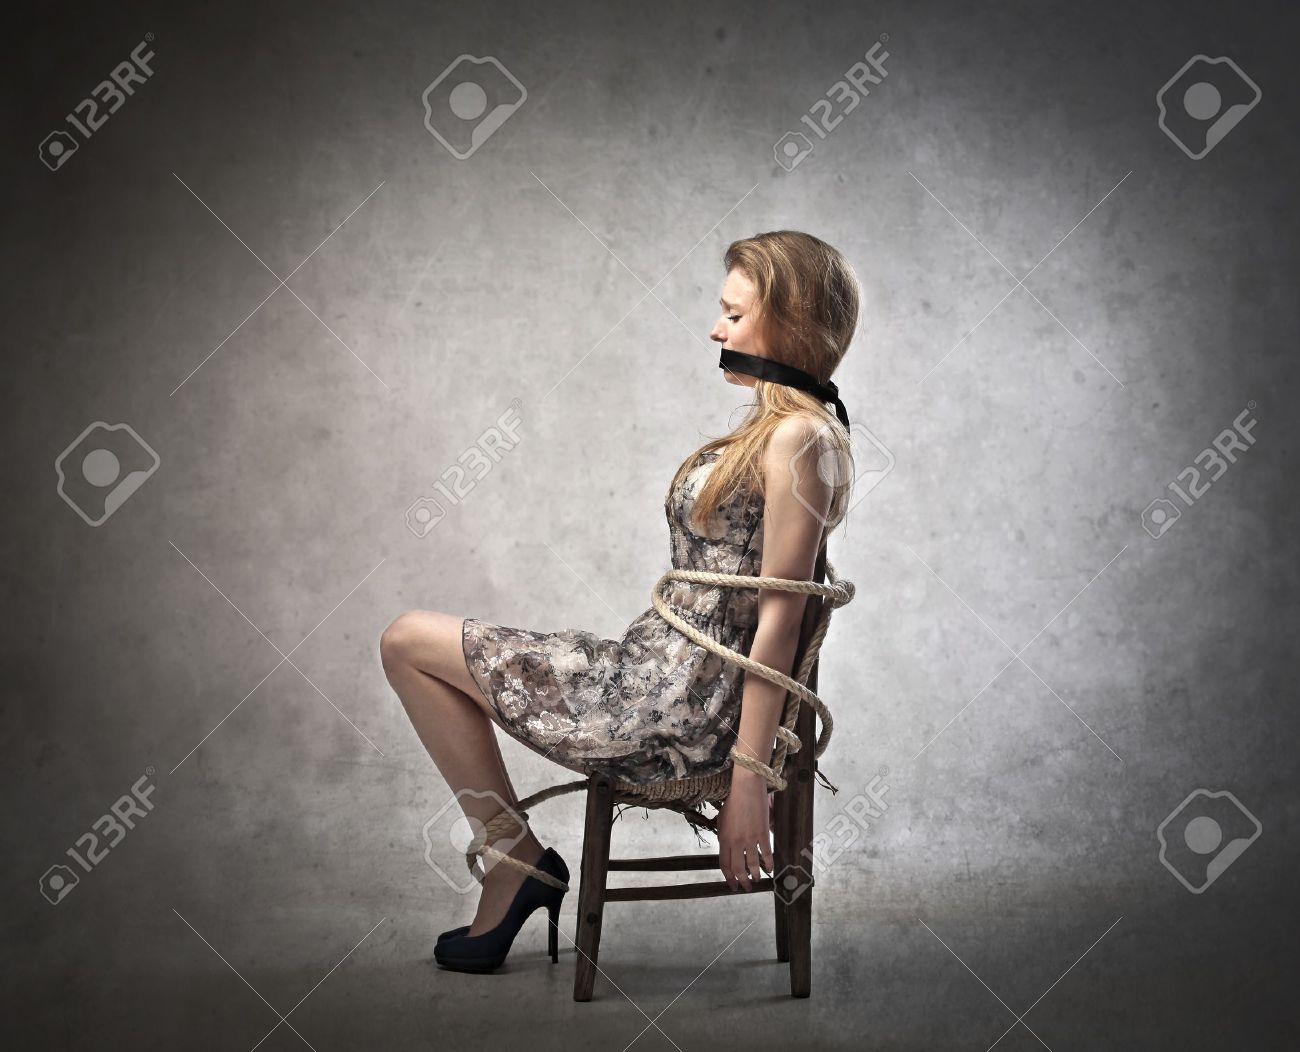 bobby baccalieri recommends woman tied to chair pic